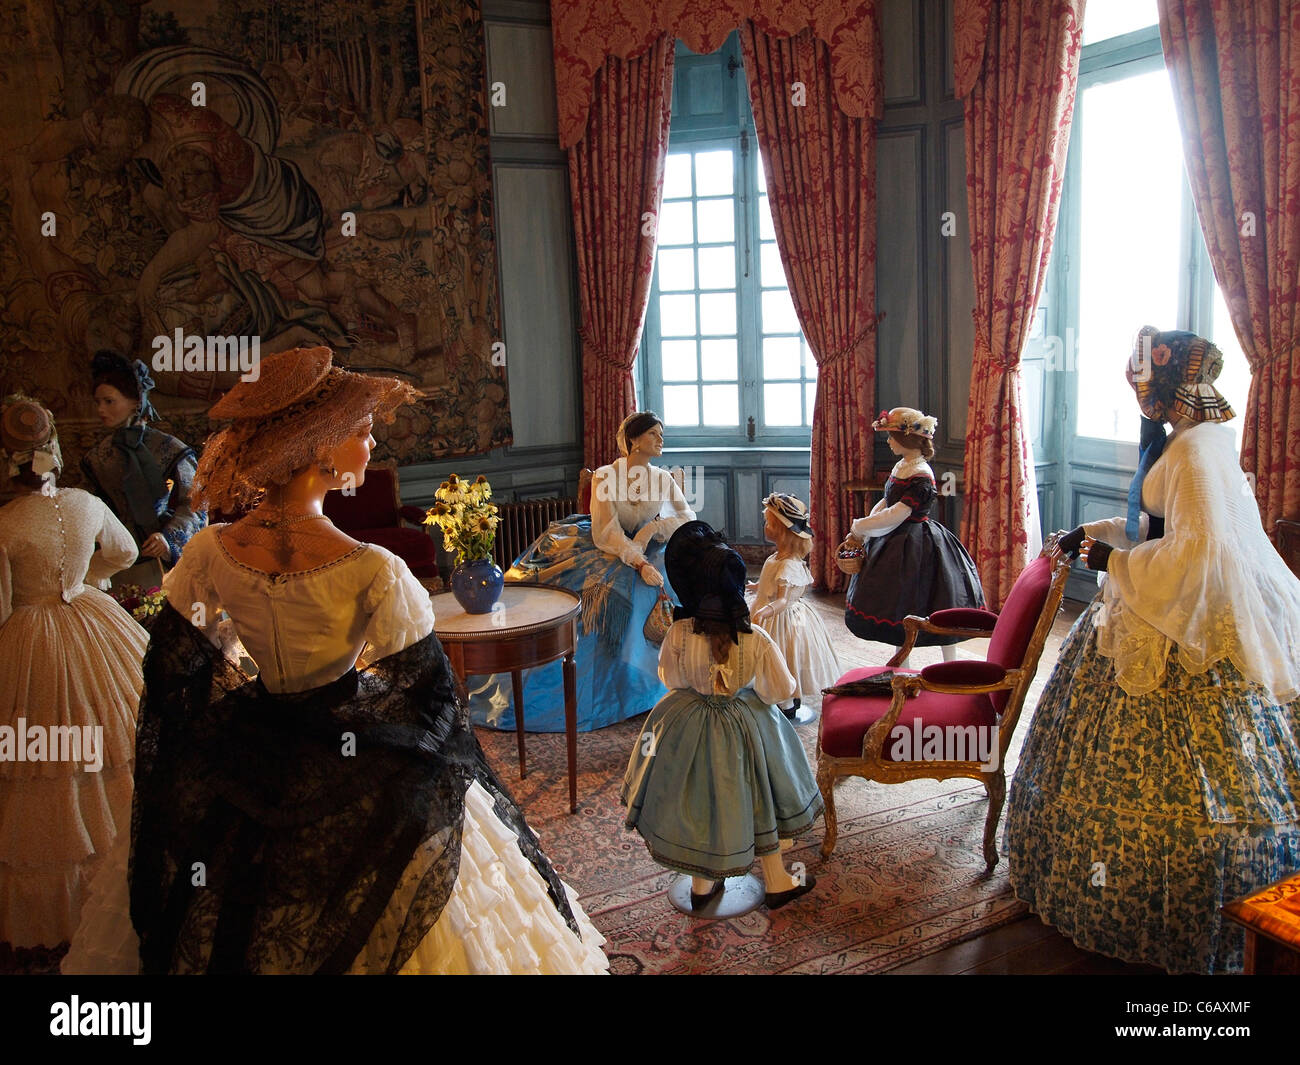 the Chateau de Ussé castle has a large collection of historic clothes and costumes on display. Loire valley, France Stock Photo